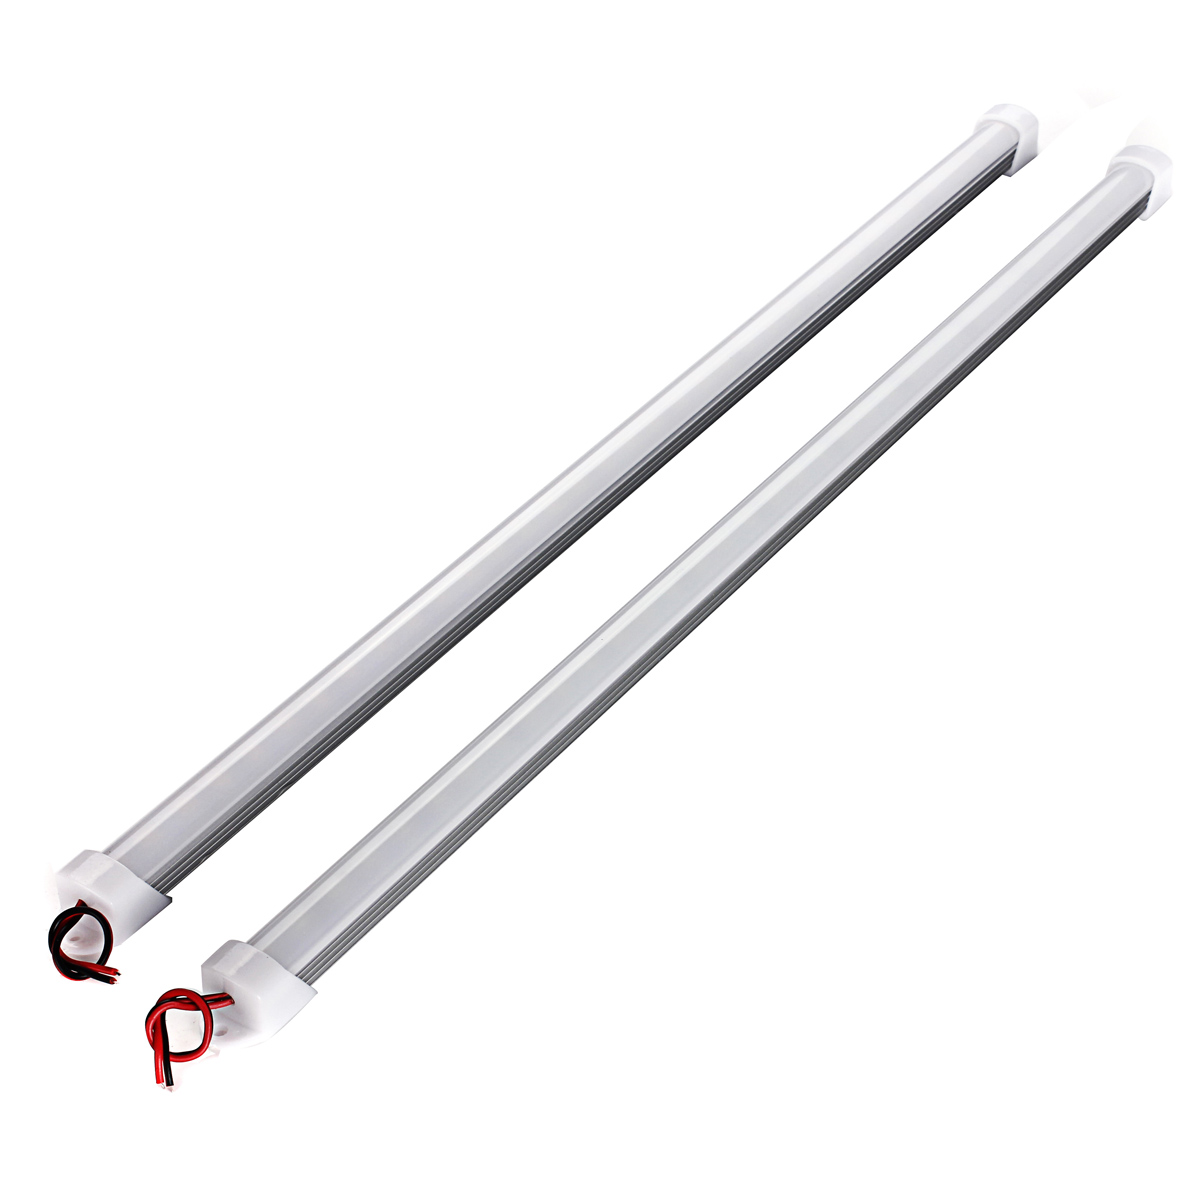 50CM-64W-5630-SMD-Pure-White-Warm-White-Waterproof-Hard-LED-Rigid-Strip-Bar-Light-With-Cover-DC12V-1283576-1